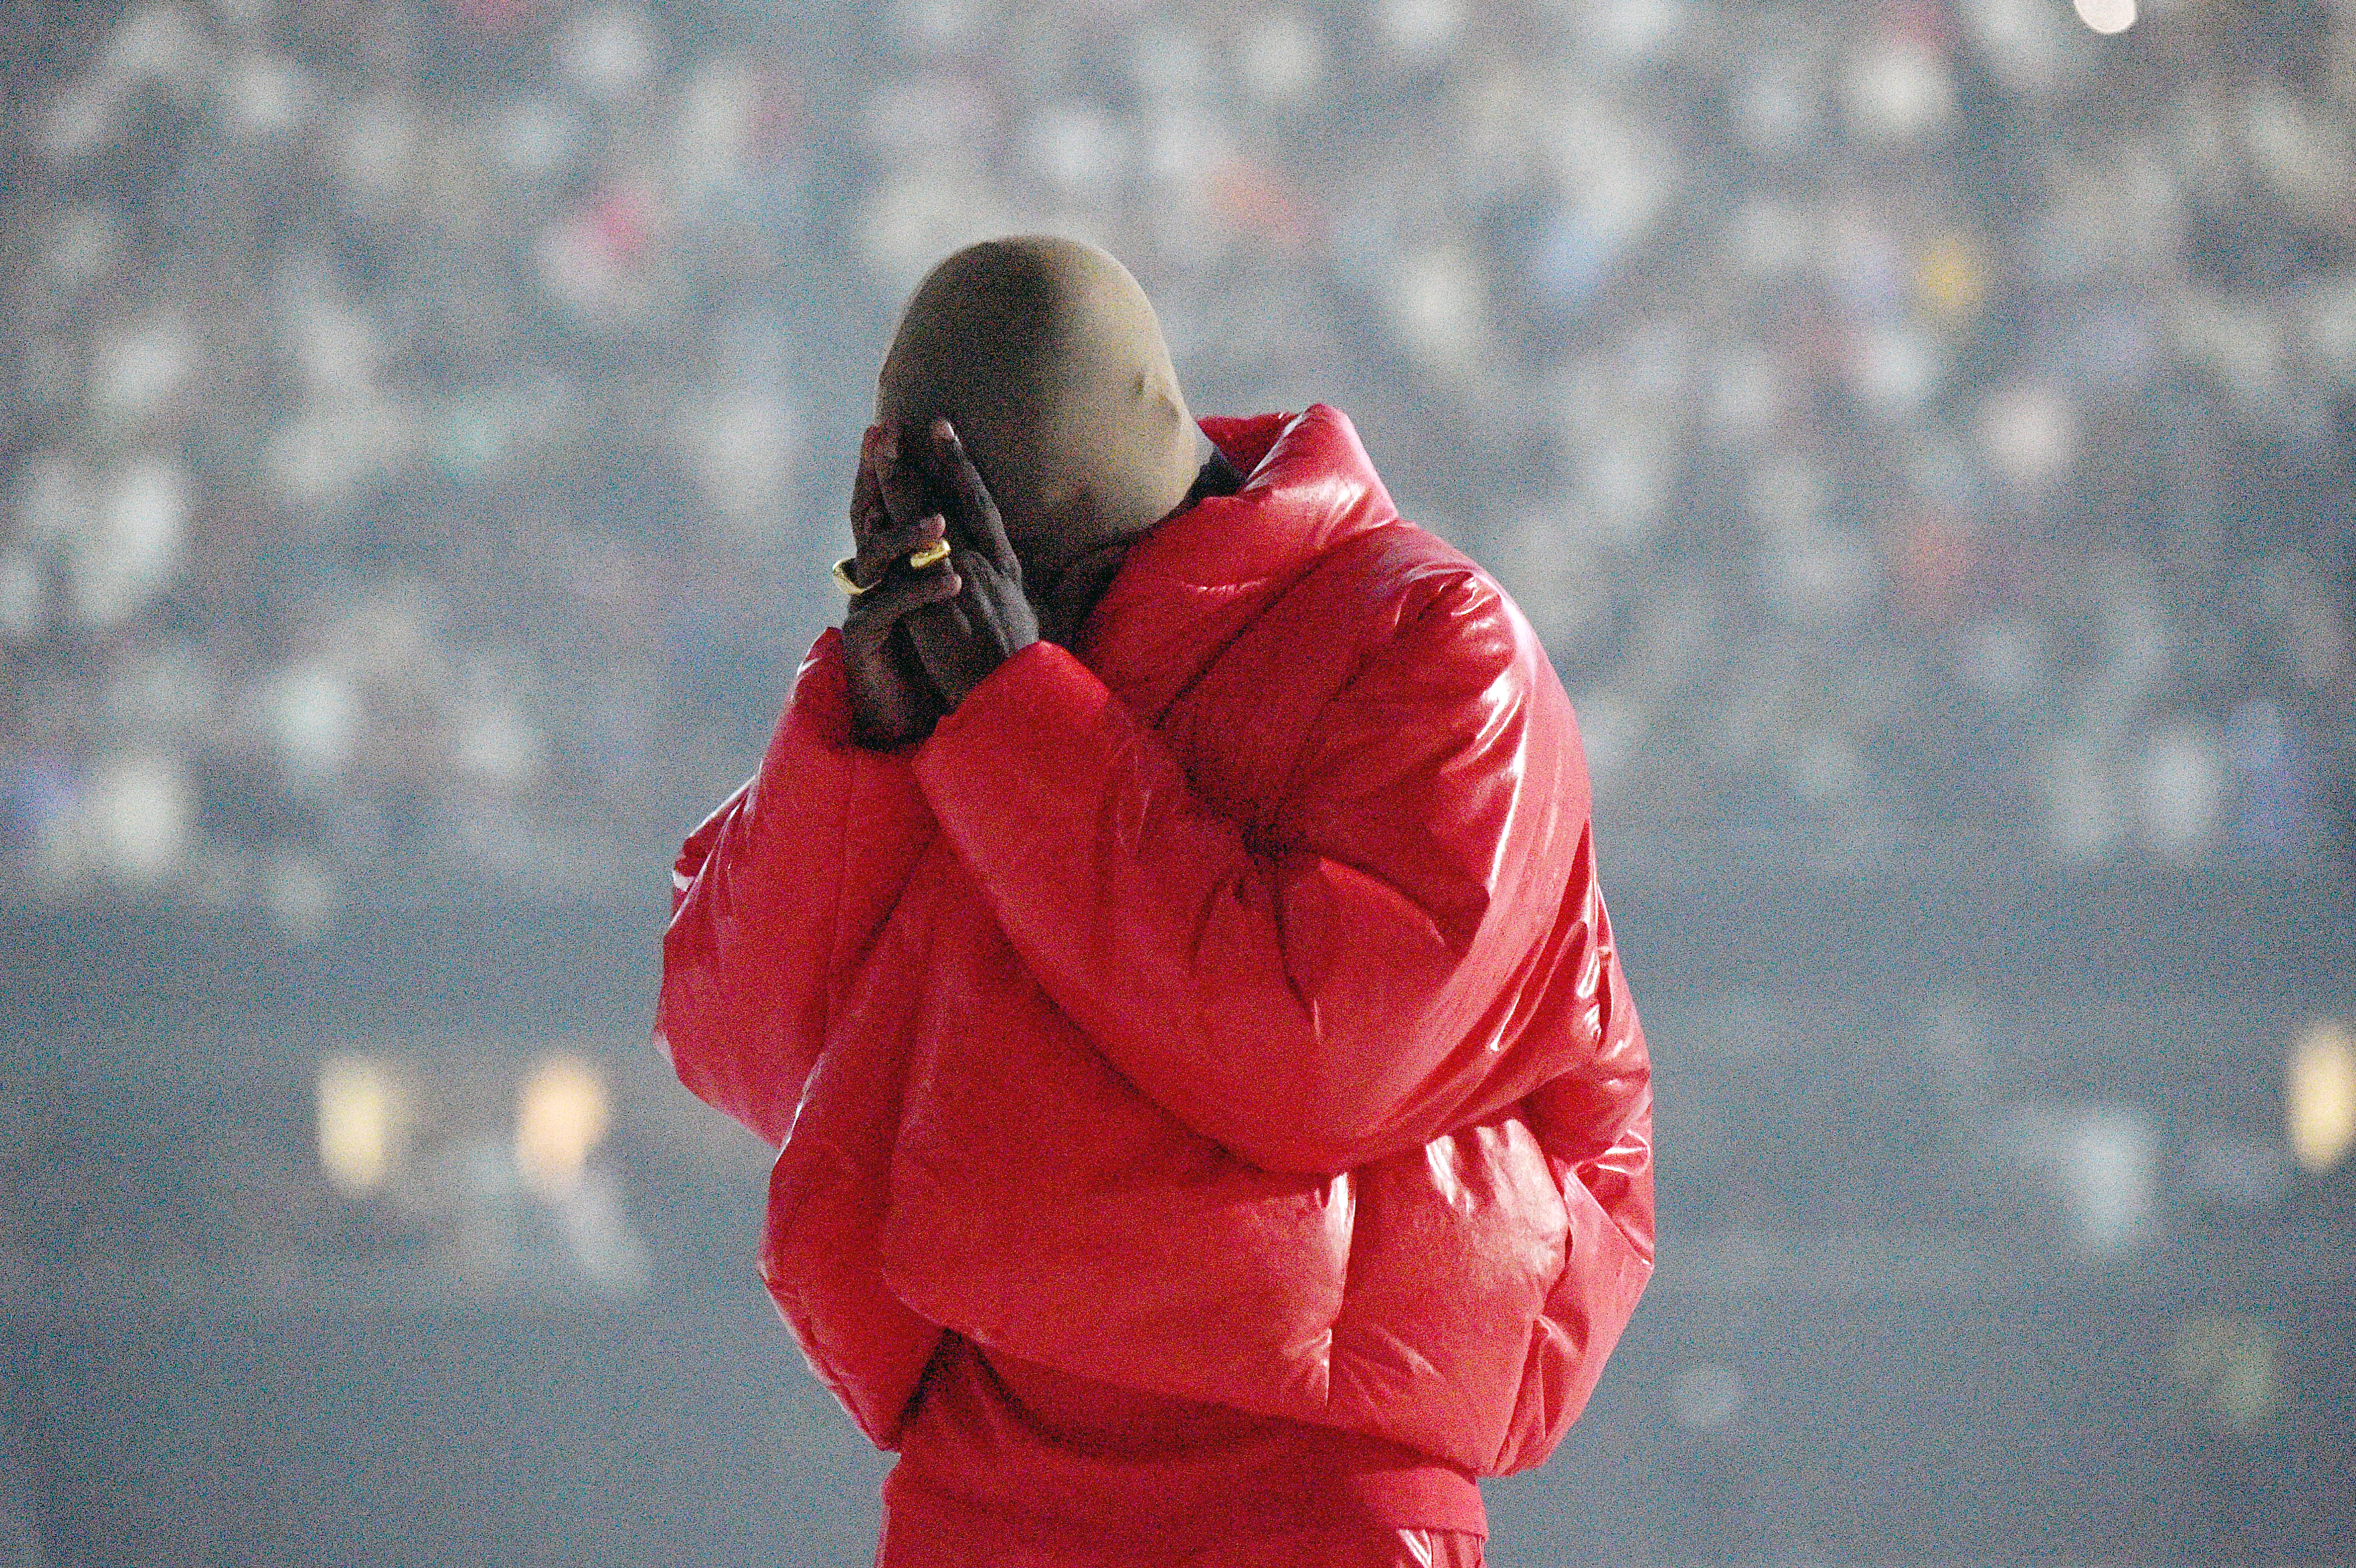 Can We Please Stop Paying Attention to Kanye West Now?